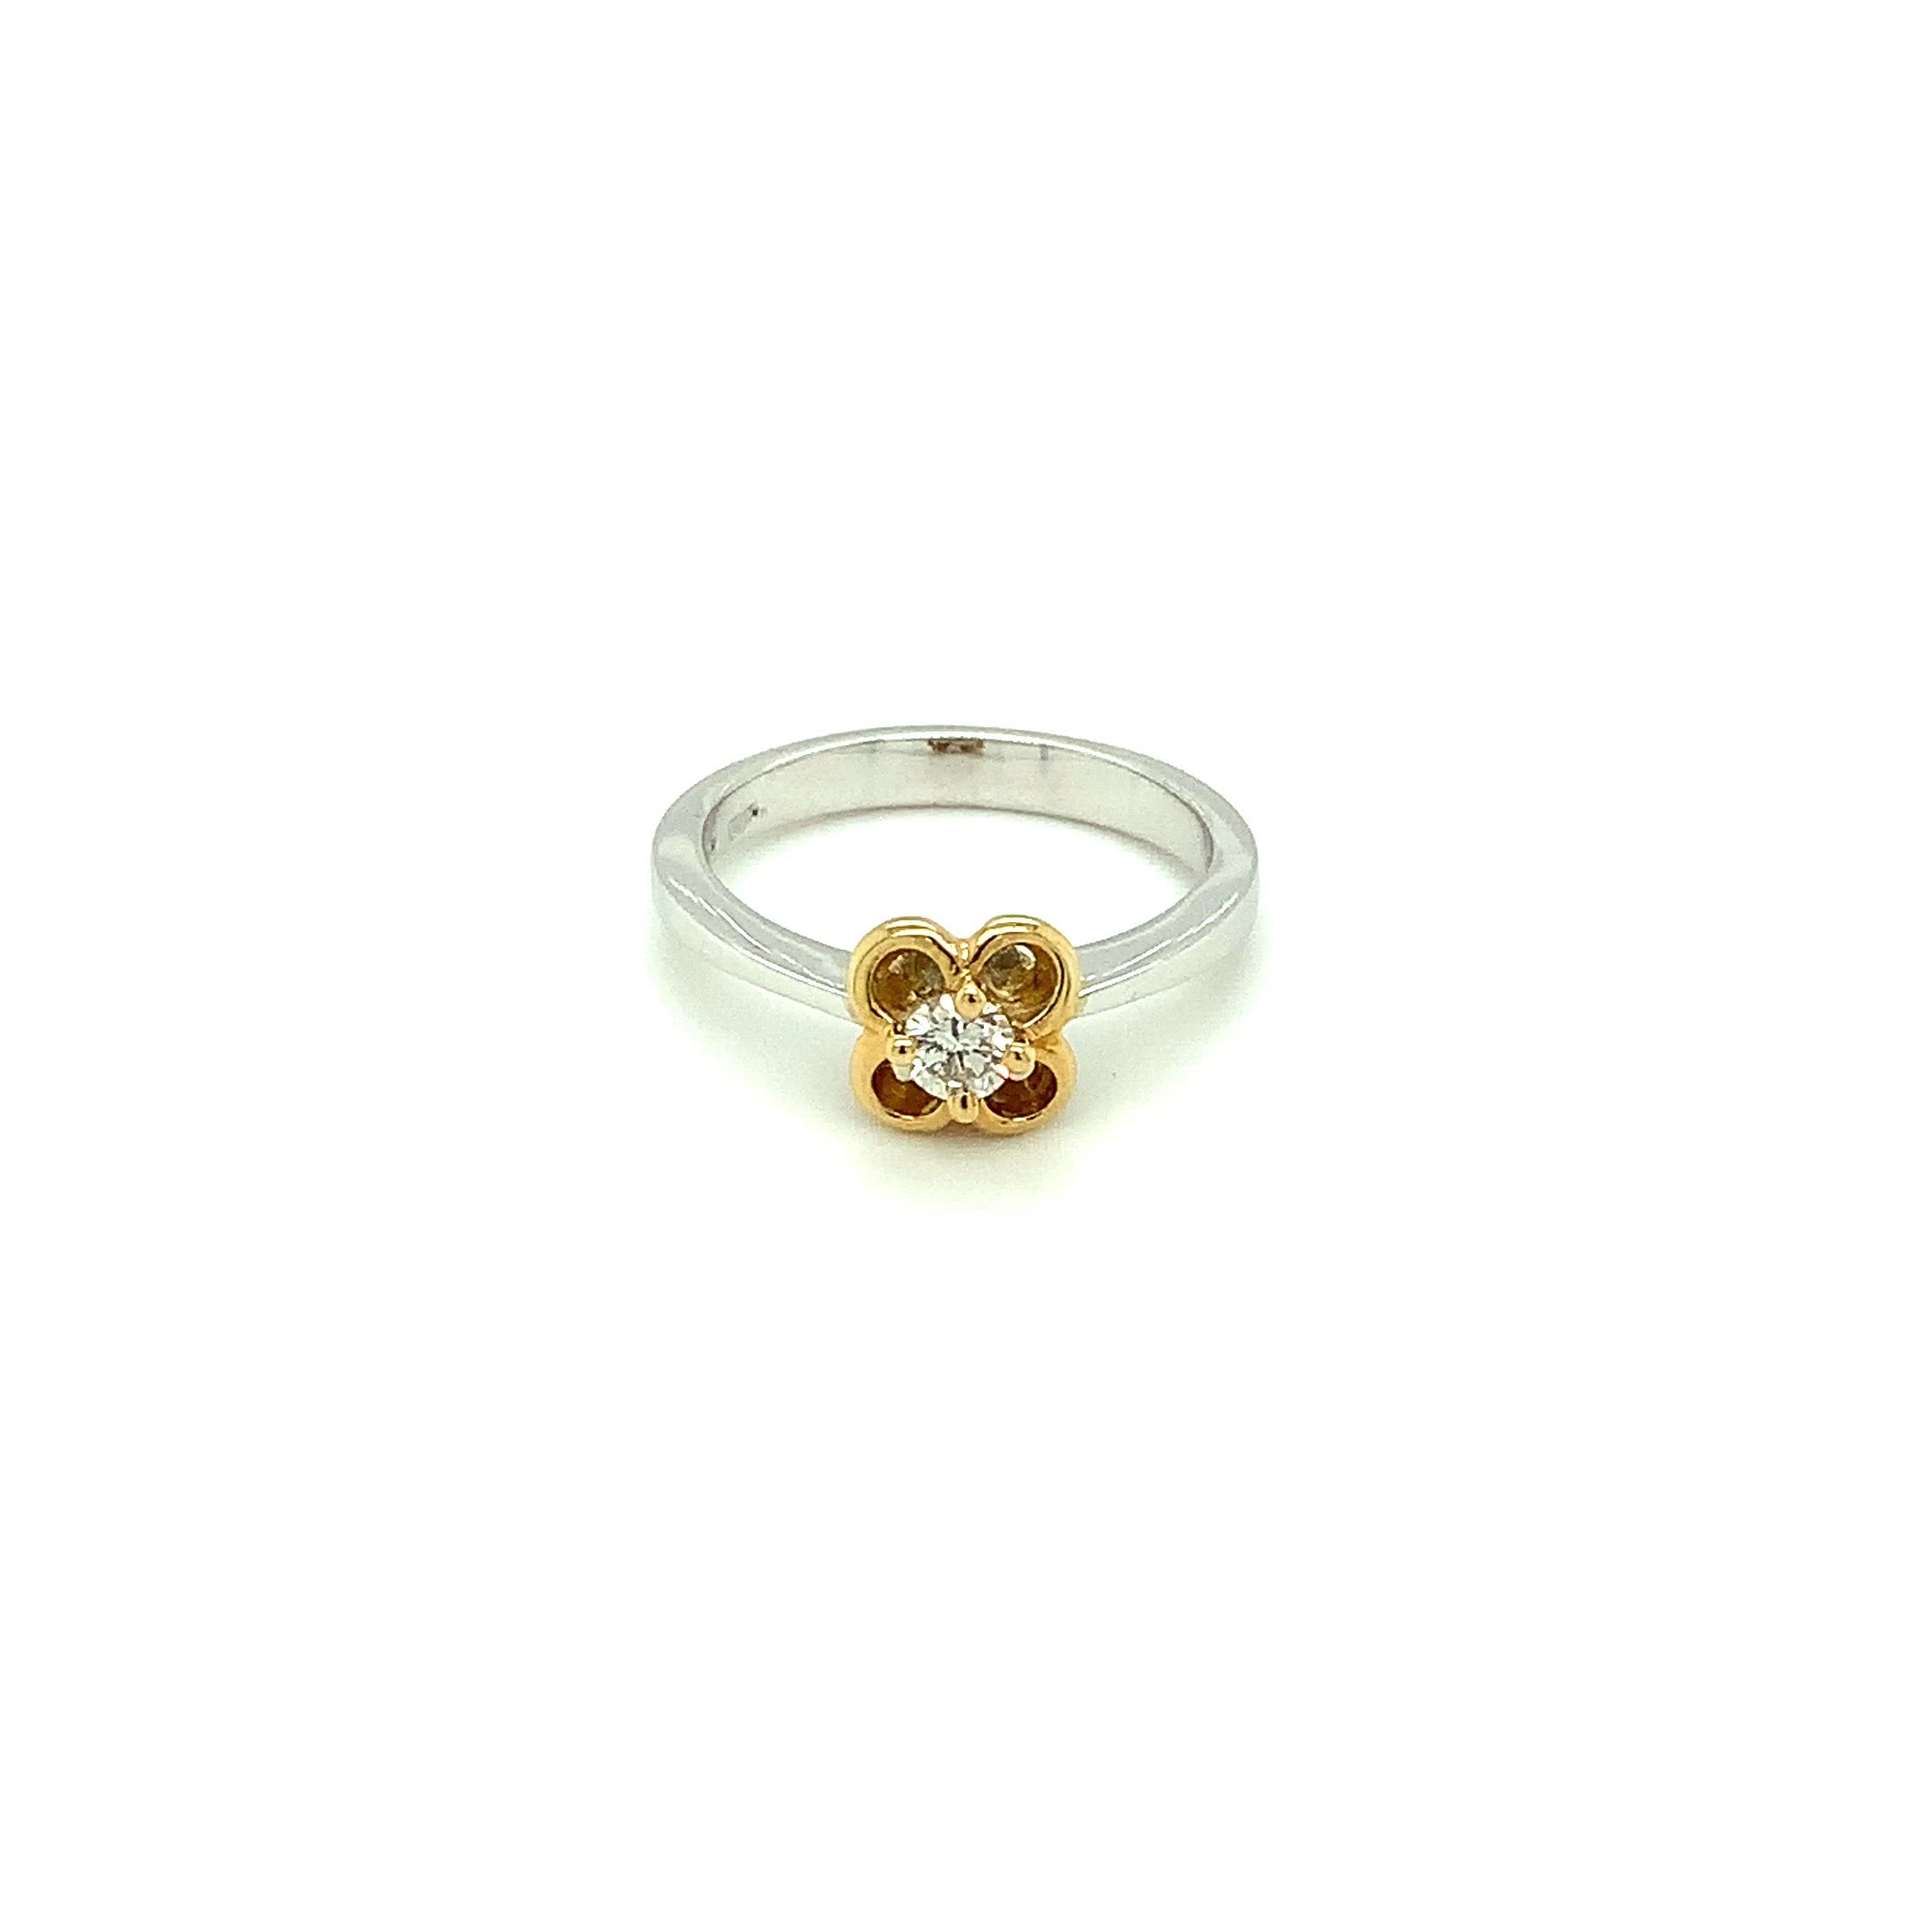 Natural Diamond Ring 18K Solid Gold .27ct Solitaire Ring Engagement Ring Flower Ring Promise Ring Wedding Ring Ladies Ring Fine Women's Ring